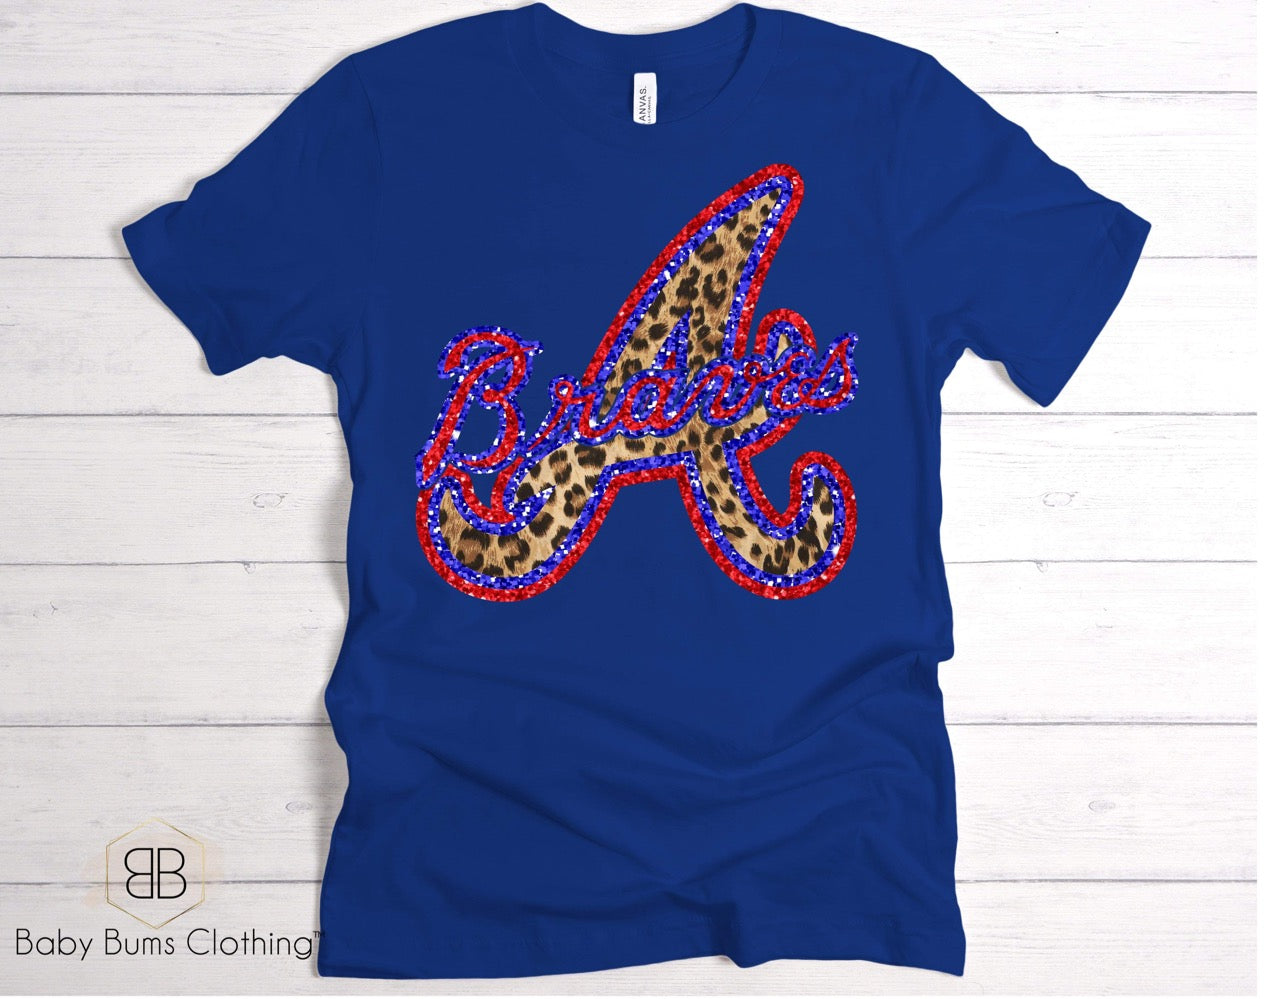 BRAVES LEOPARD ADULT UNISEX T-SHIRT - Baby Bums Clothing 